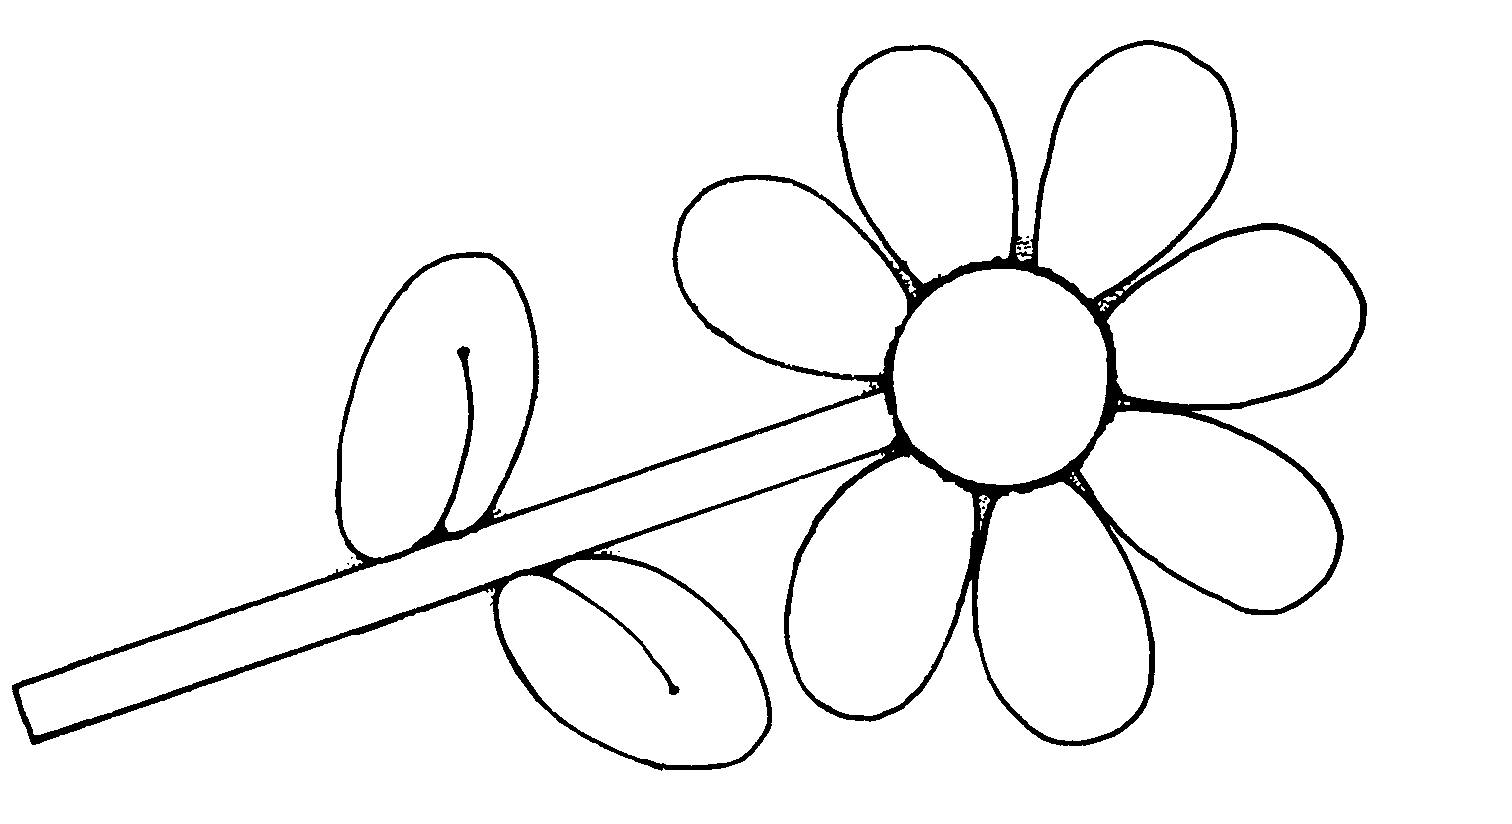 free-flower-clipart-black-and-white-download-free-flower-clipart-black